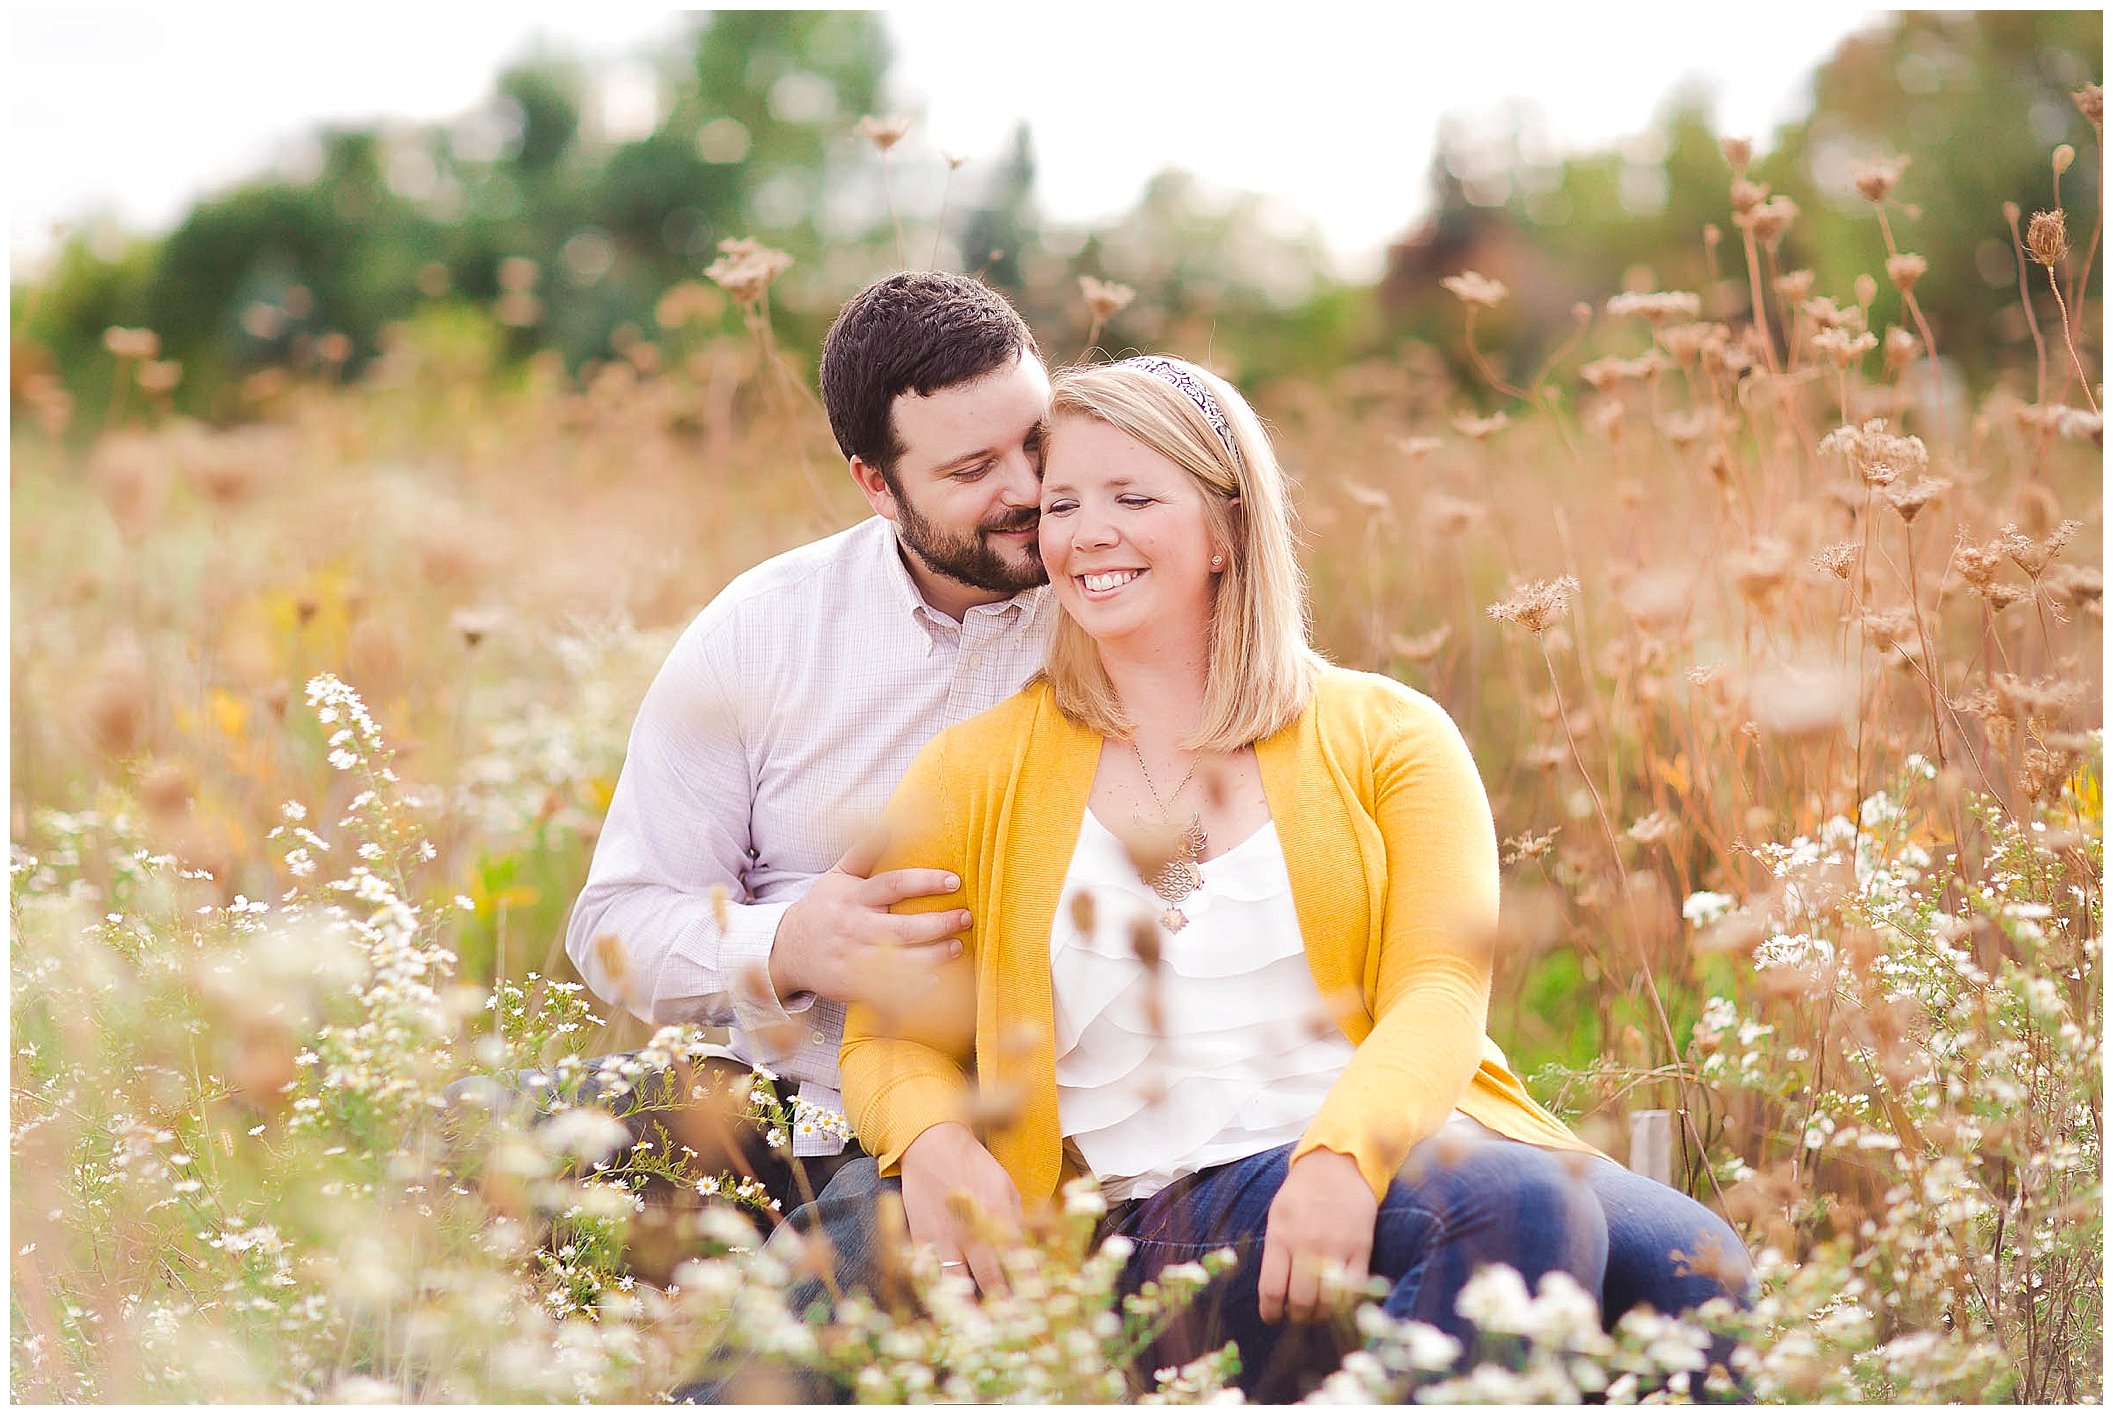 Sunshine filled engagement session in a field of wildflowers, Fort Wayne Indiana Wedding Photographer_0004.jpg